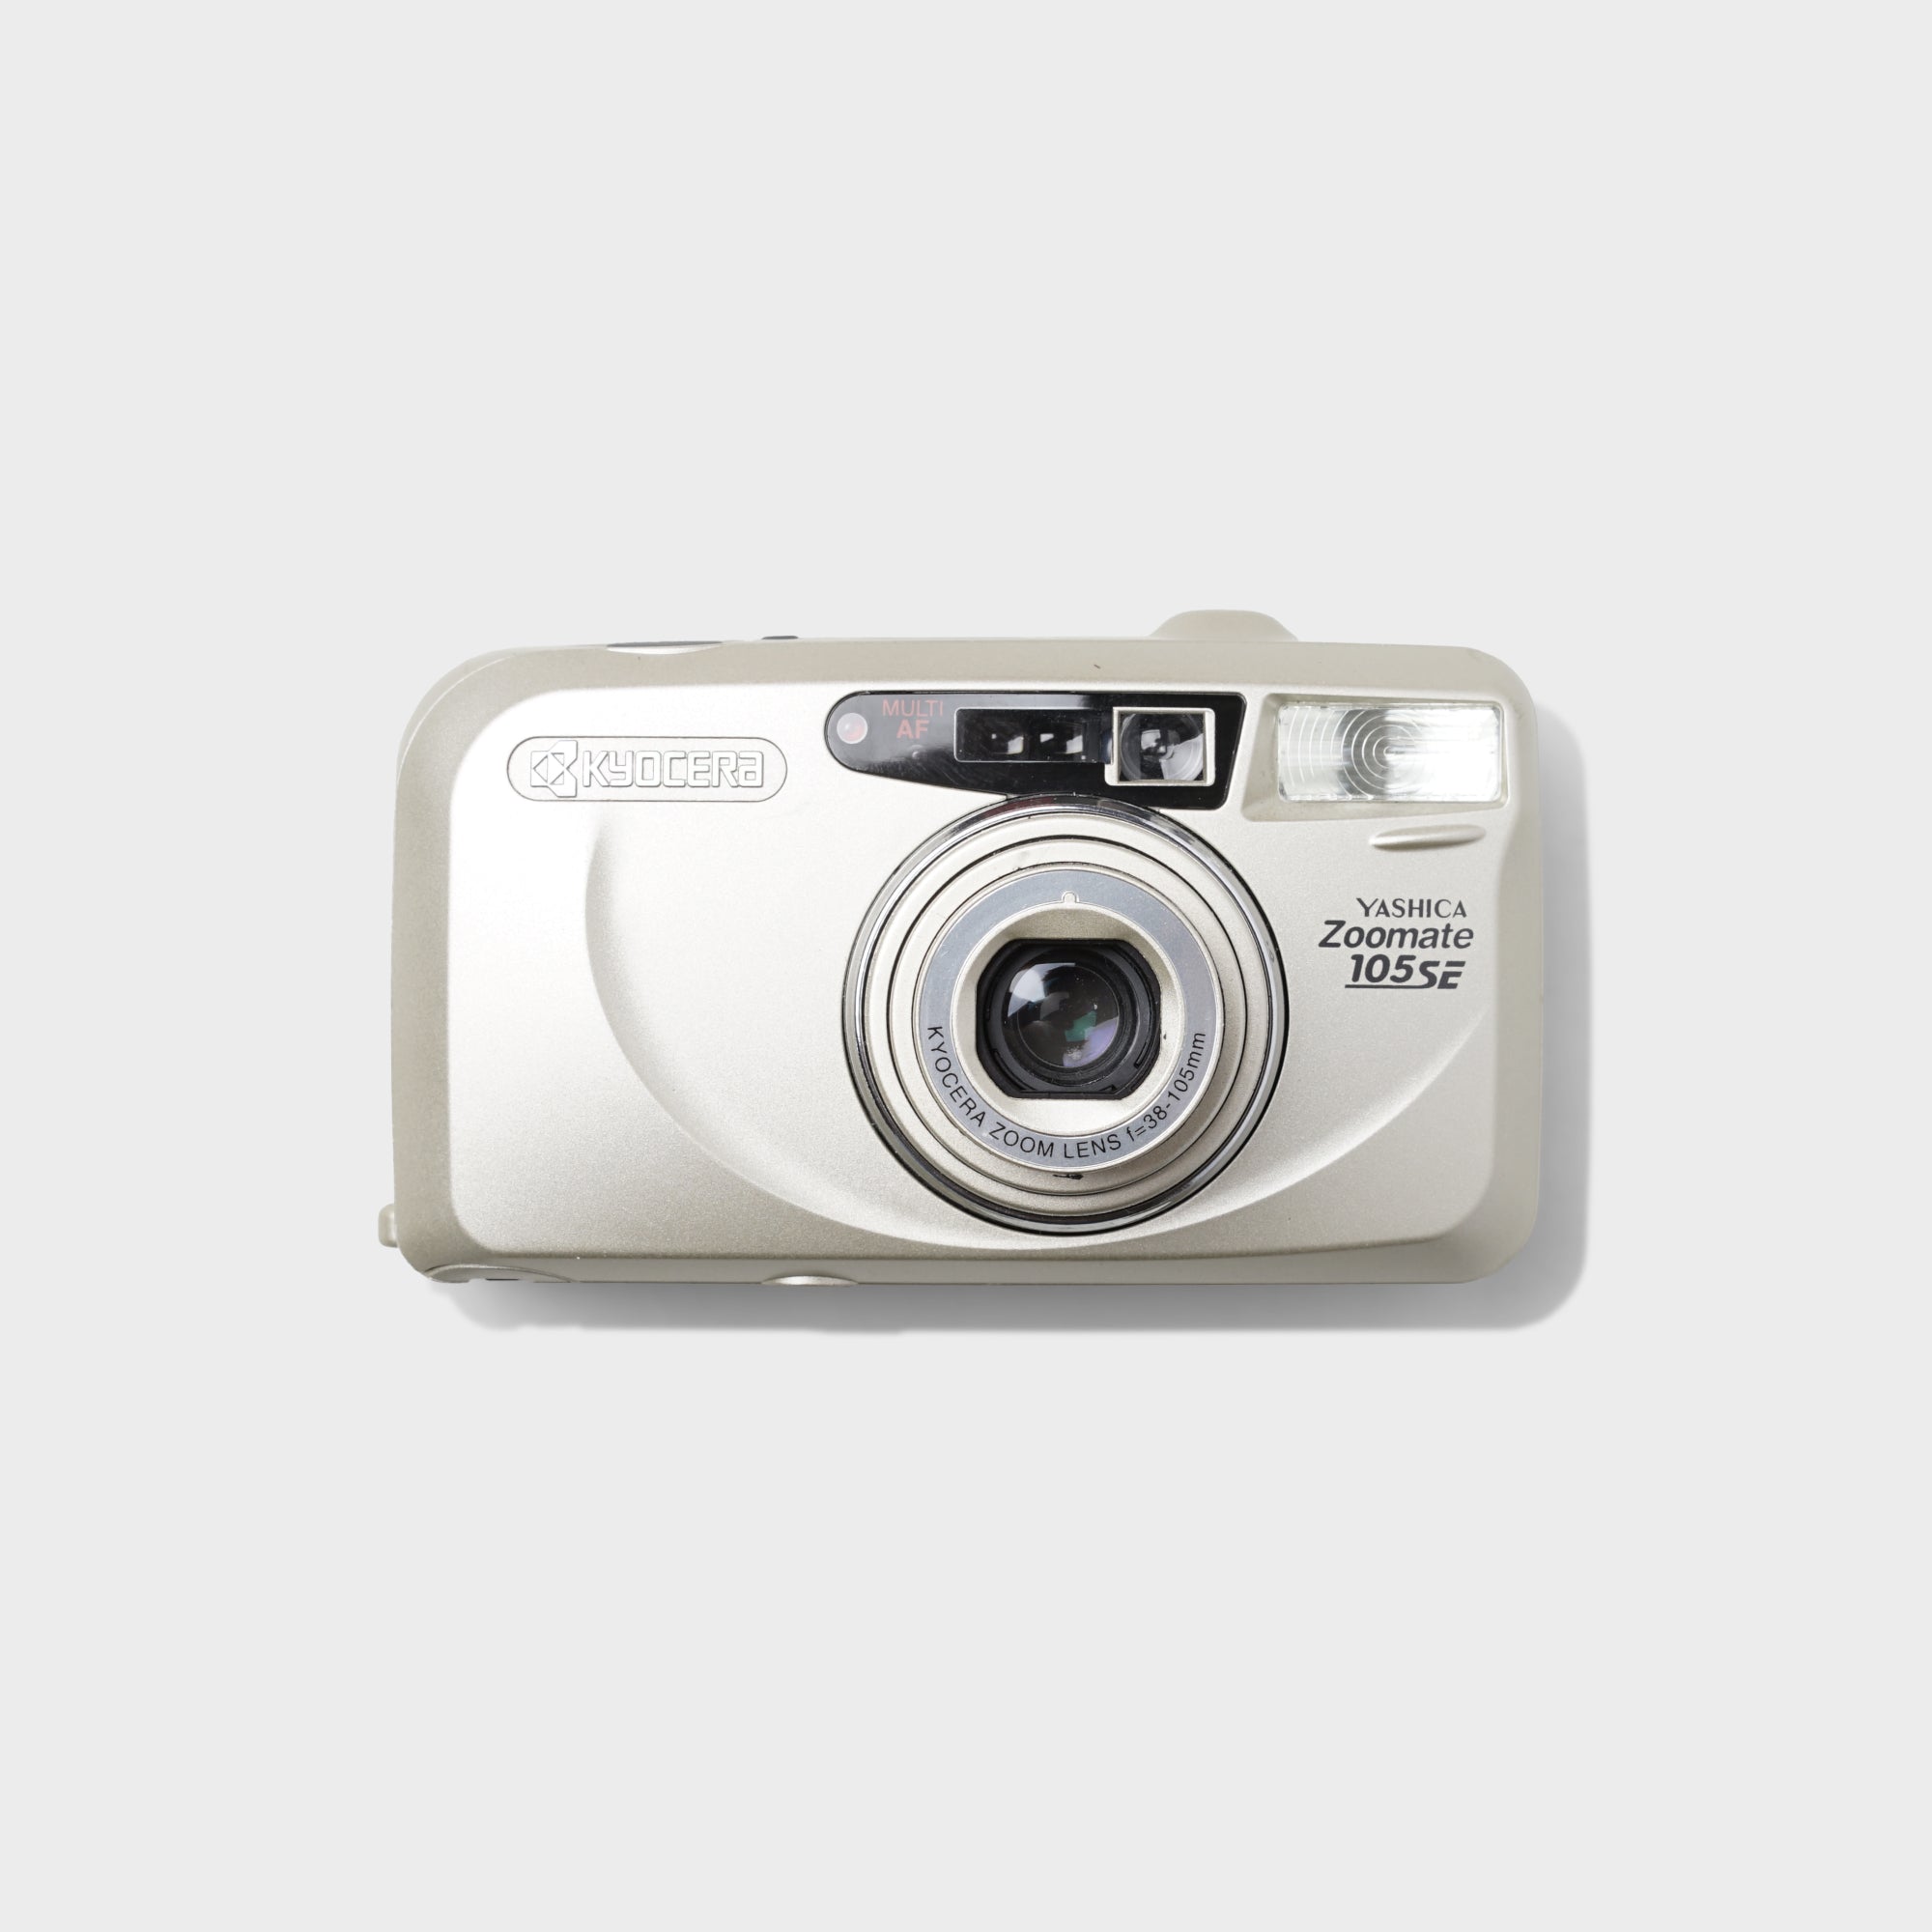 Buy Yashica Zoomate 105SE now at Analogue Amsterdam